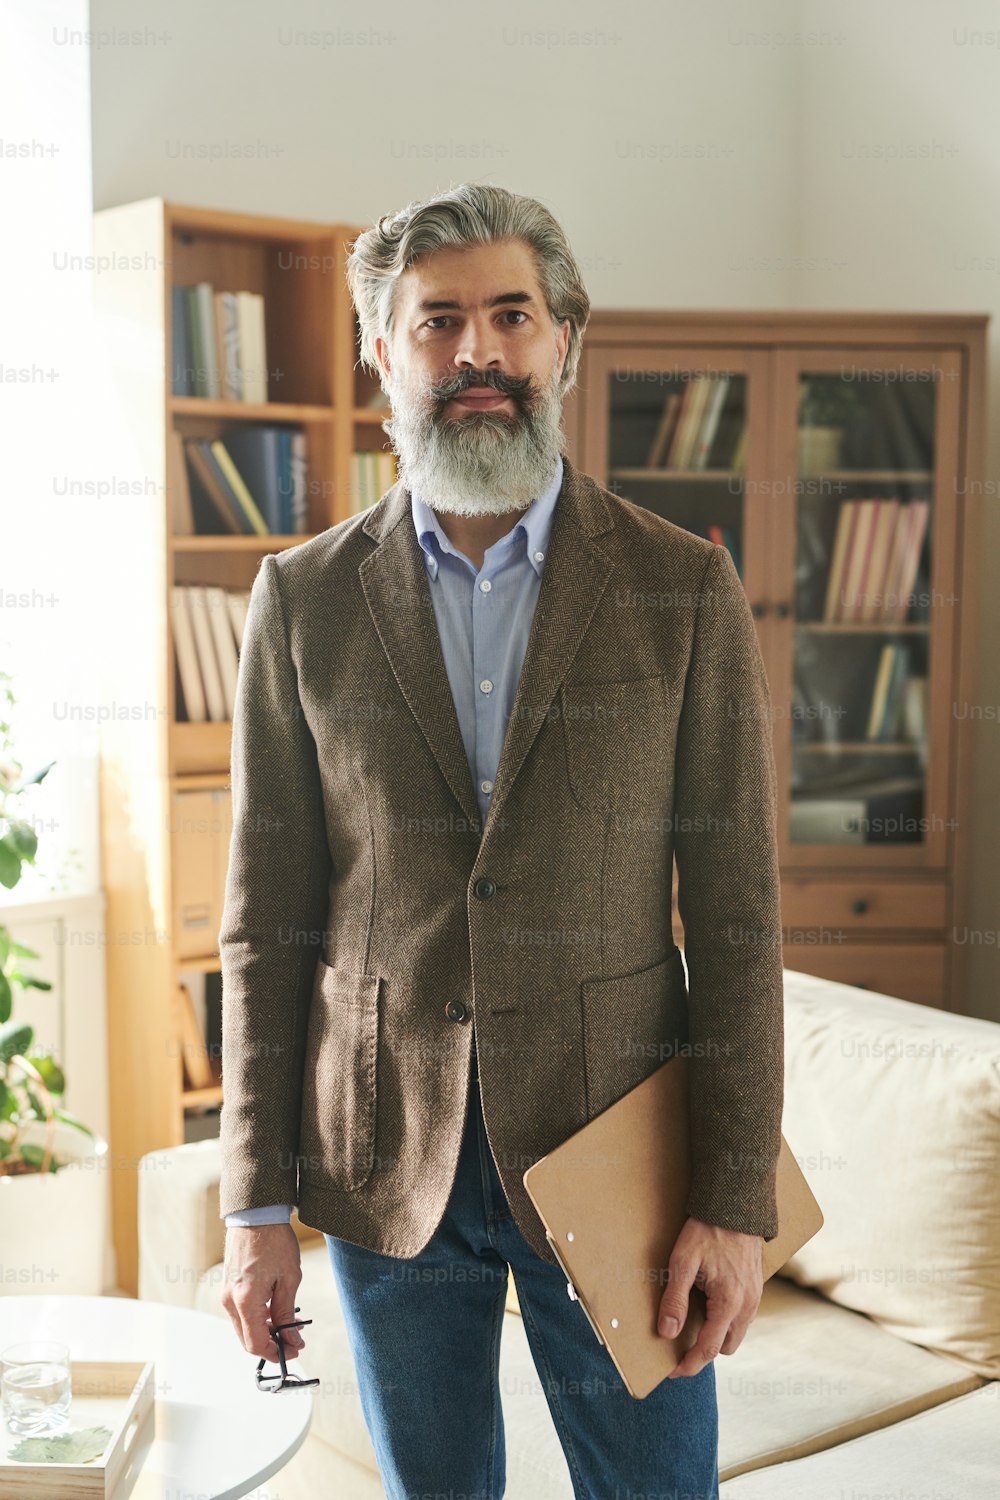 Medium long shot portrait of stylish mature man working as psychologist standing in his office holding clipboard and eyeglasses looking at camera